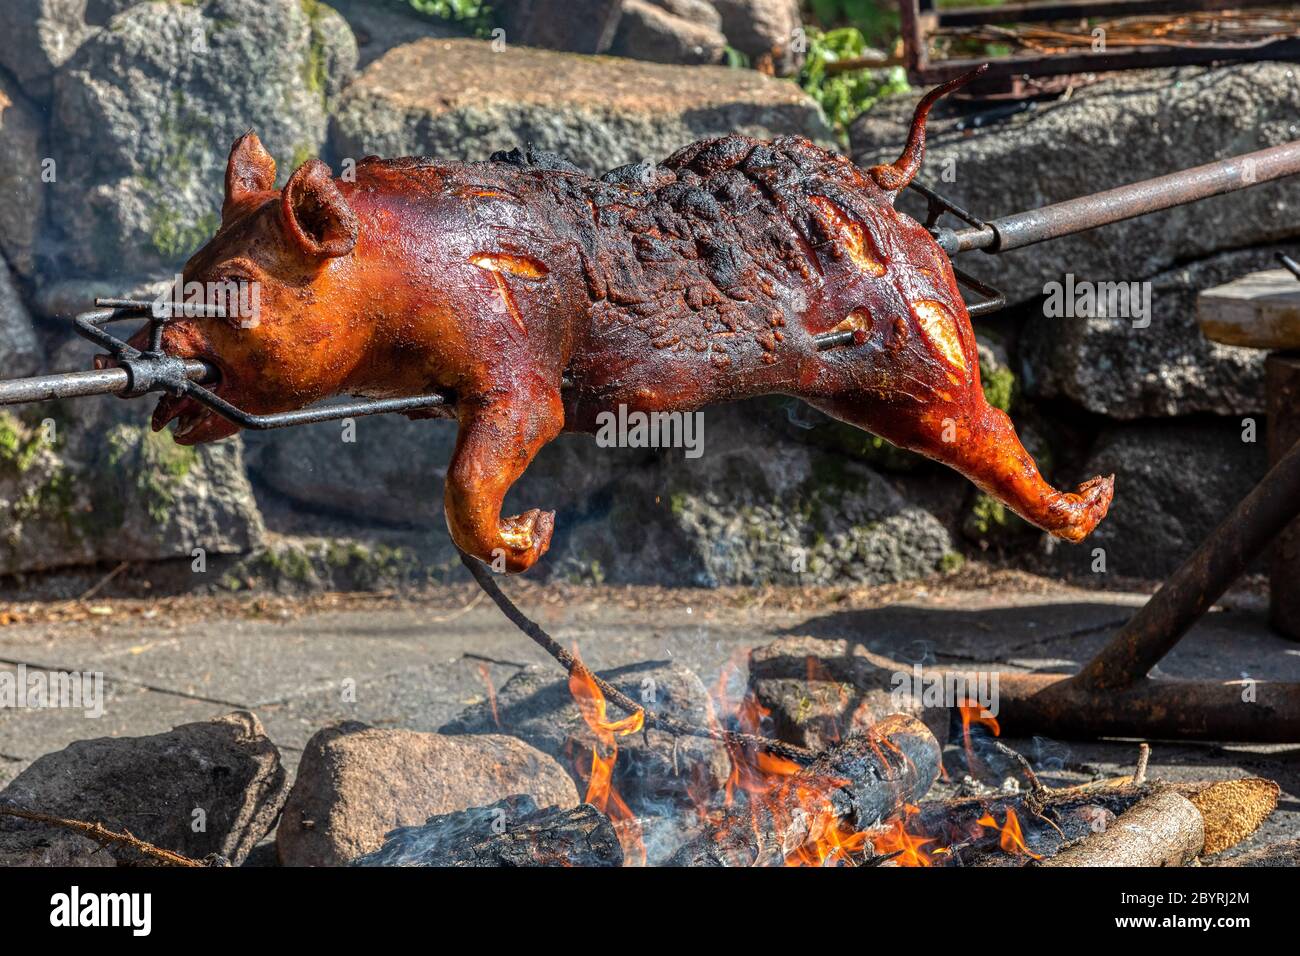 Suckling pig roasted on a spit. Piglet on the spit, open fire grill in outdoor Stock Photo